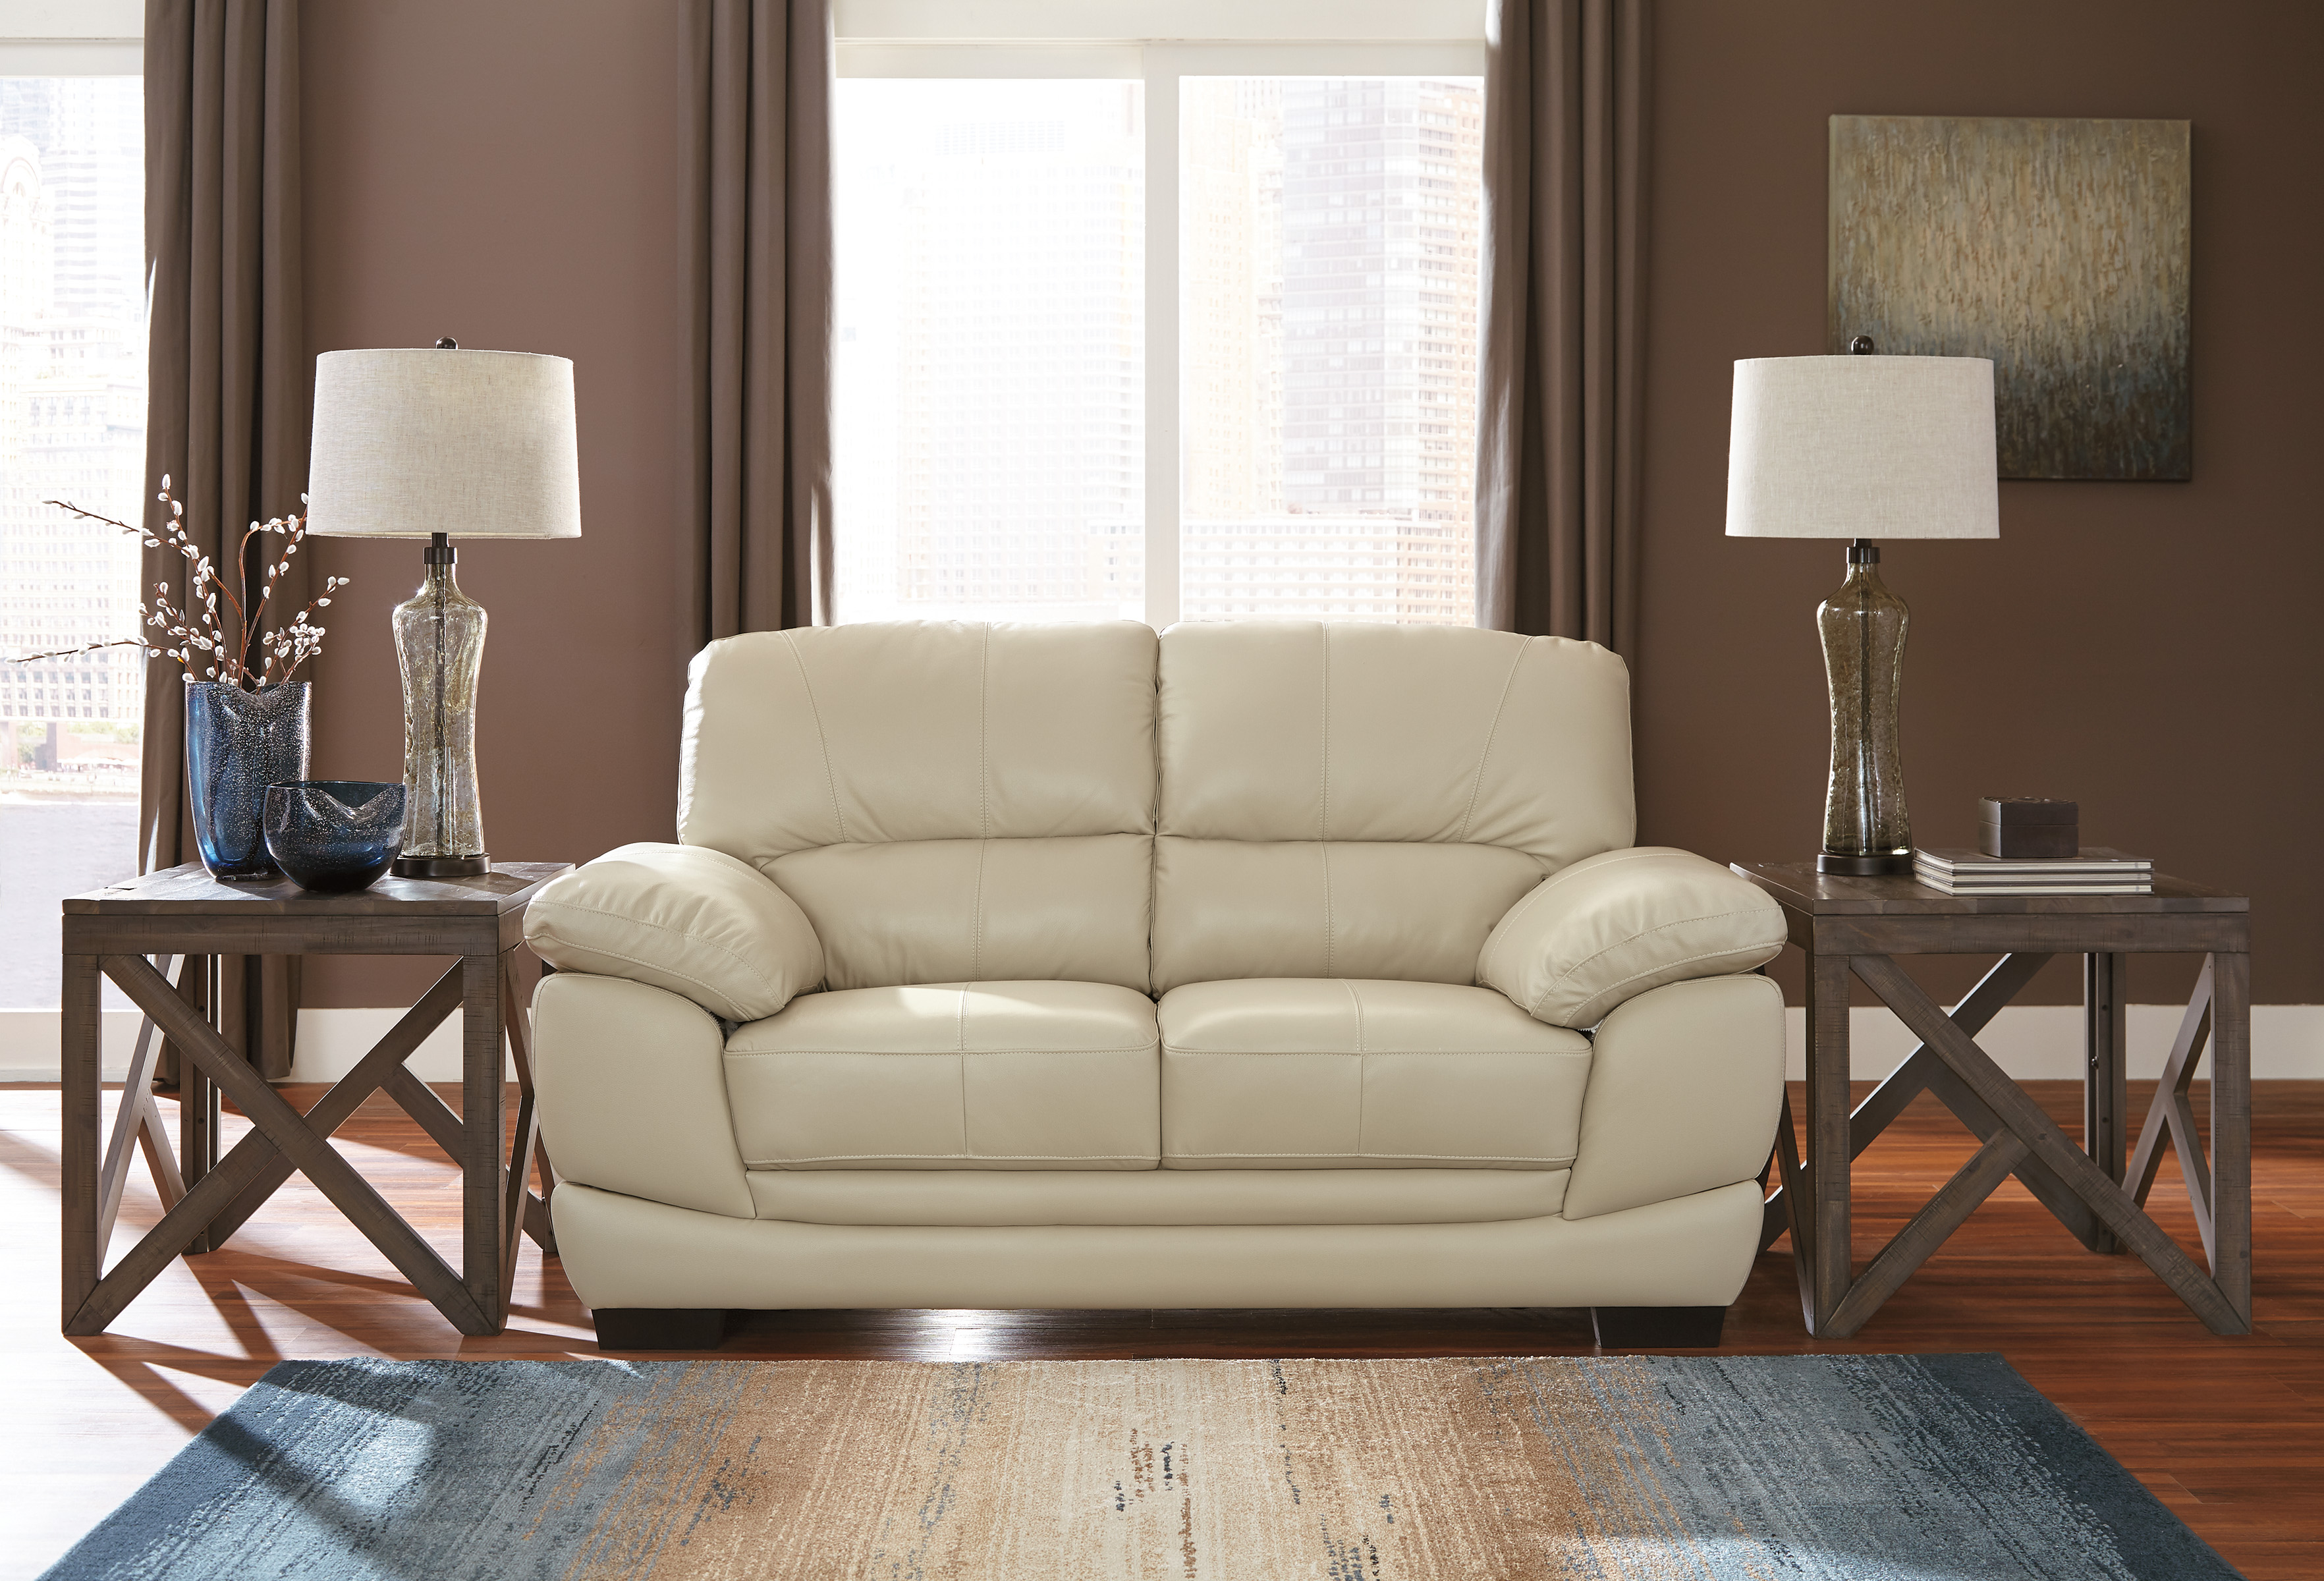 Color Leather Sofa Loveseat Chair, Cream Colored Leather Sofas